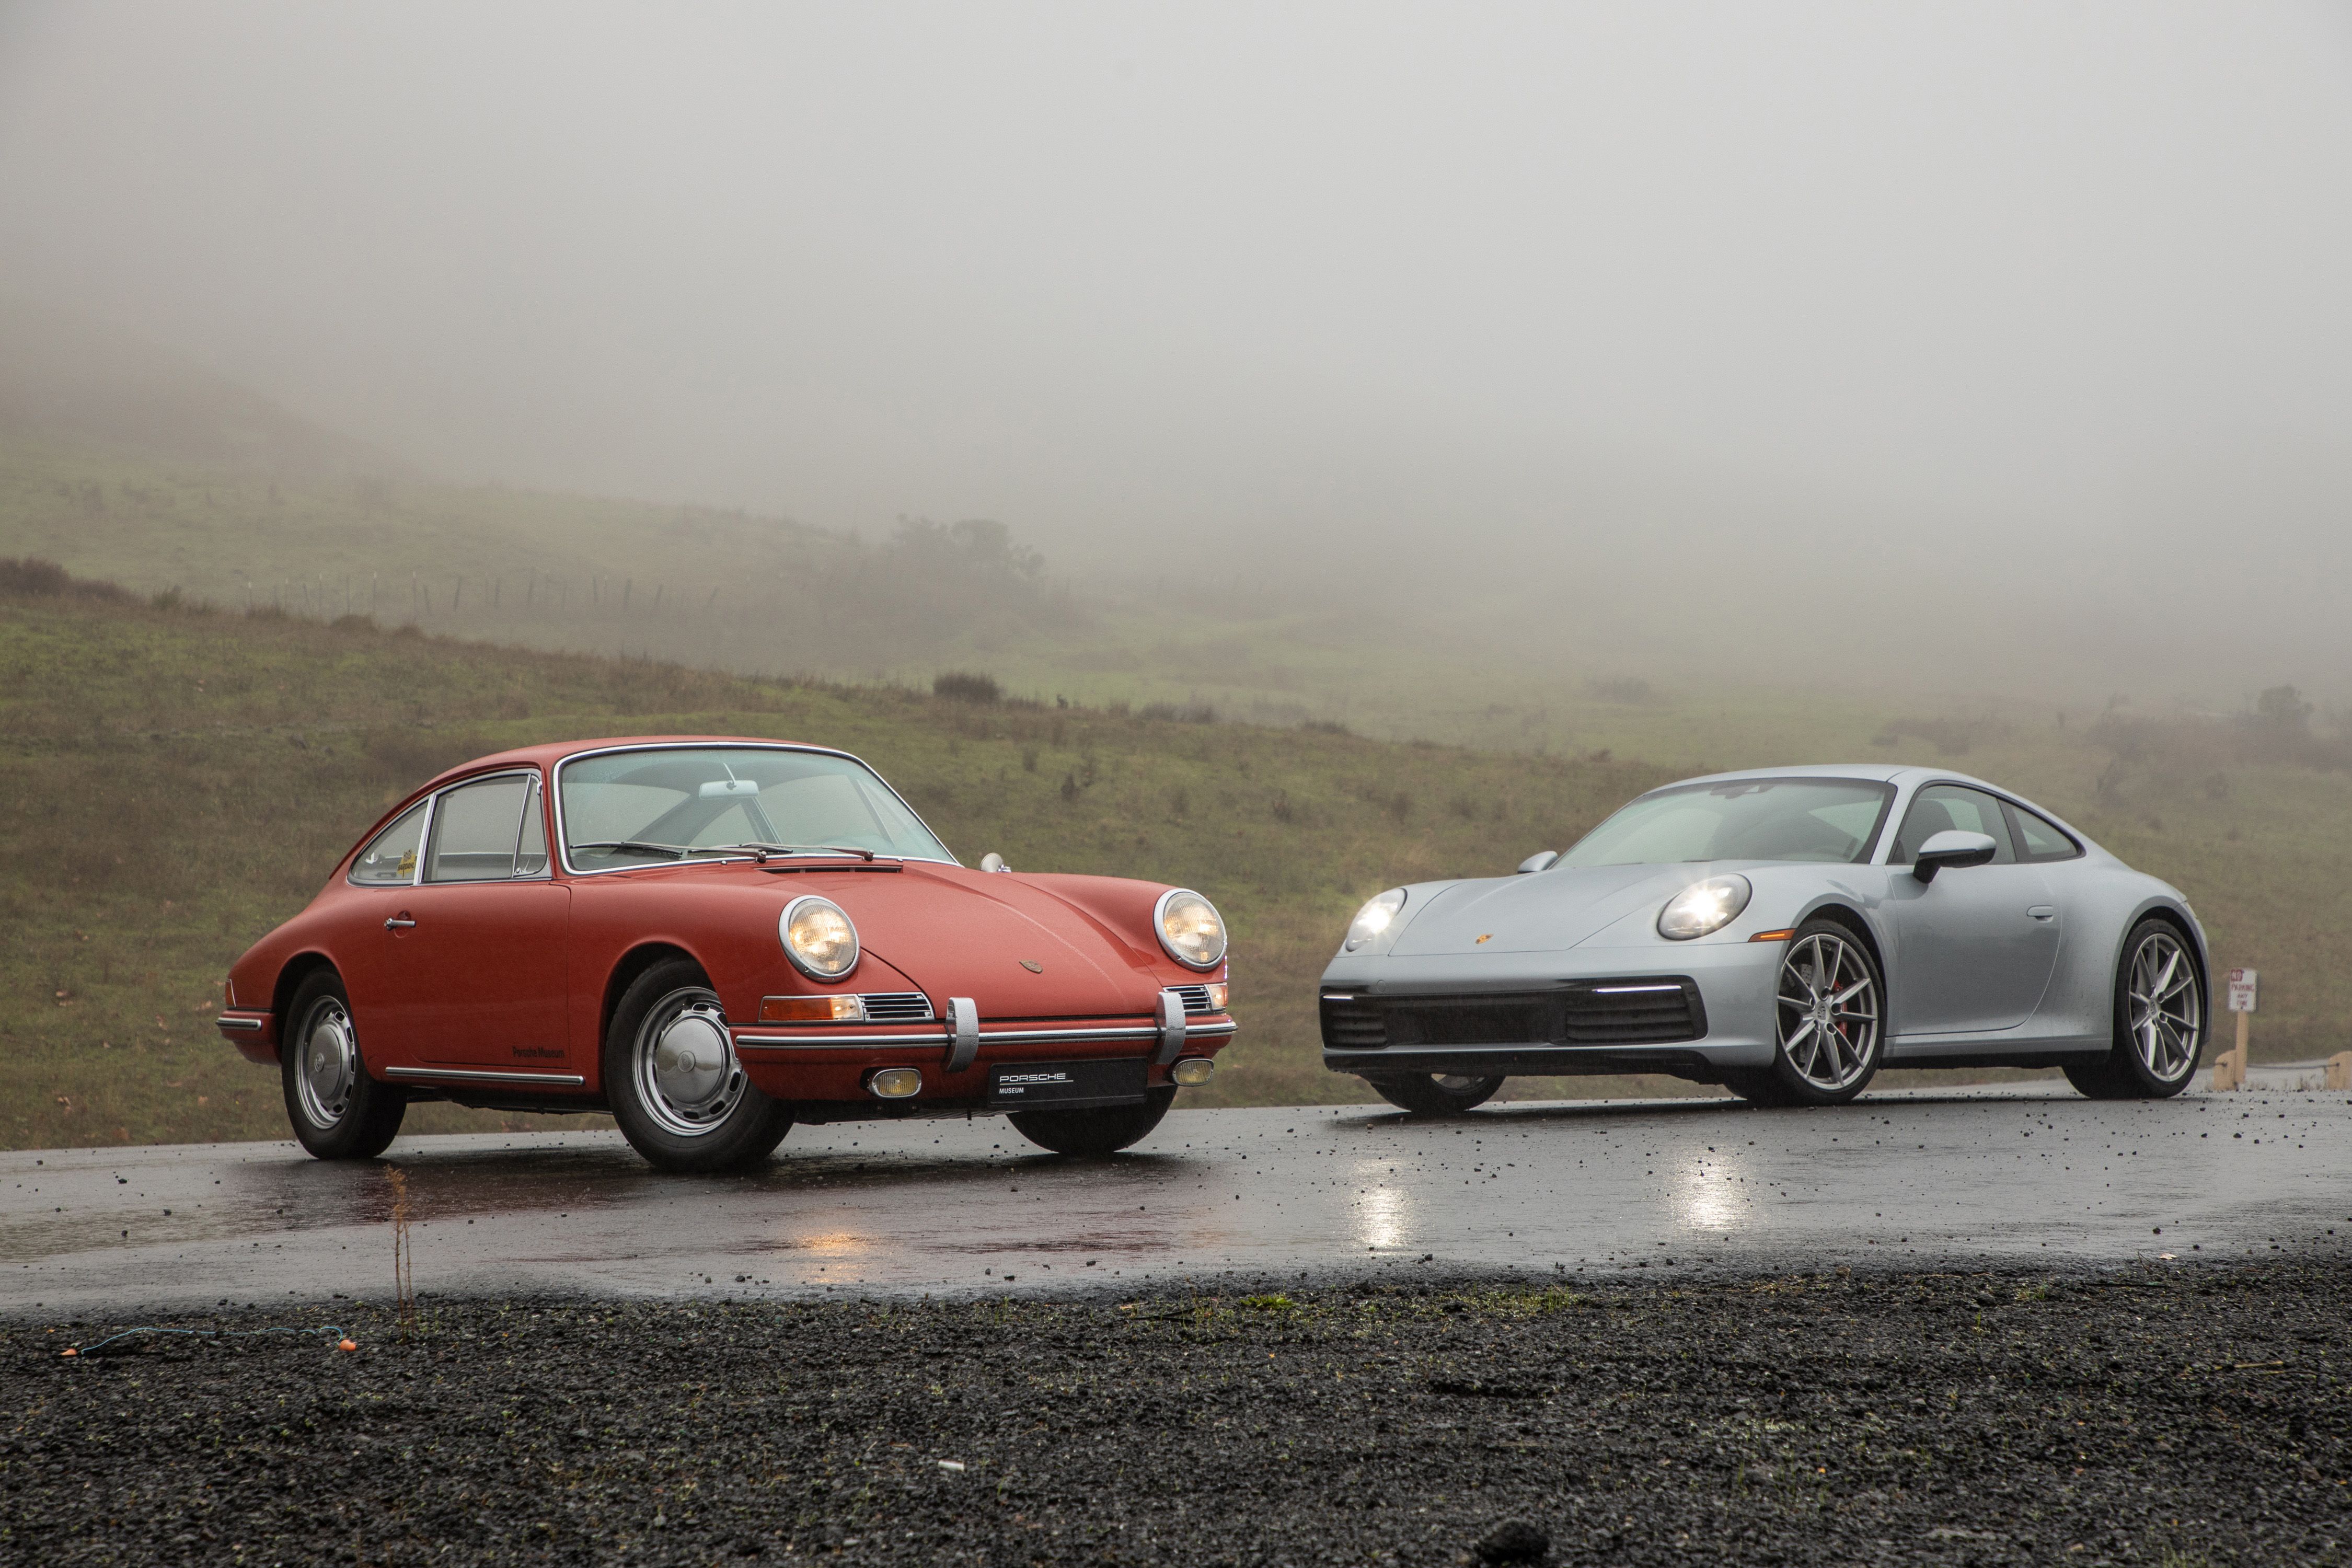 Defining the Porsche 911: New vs. Old